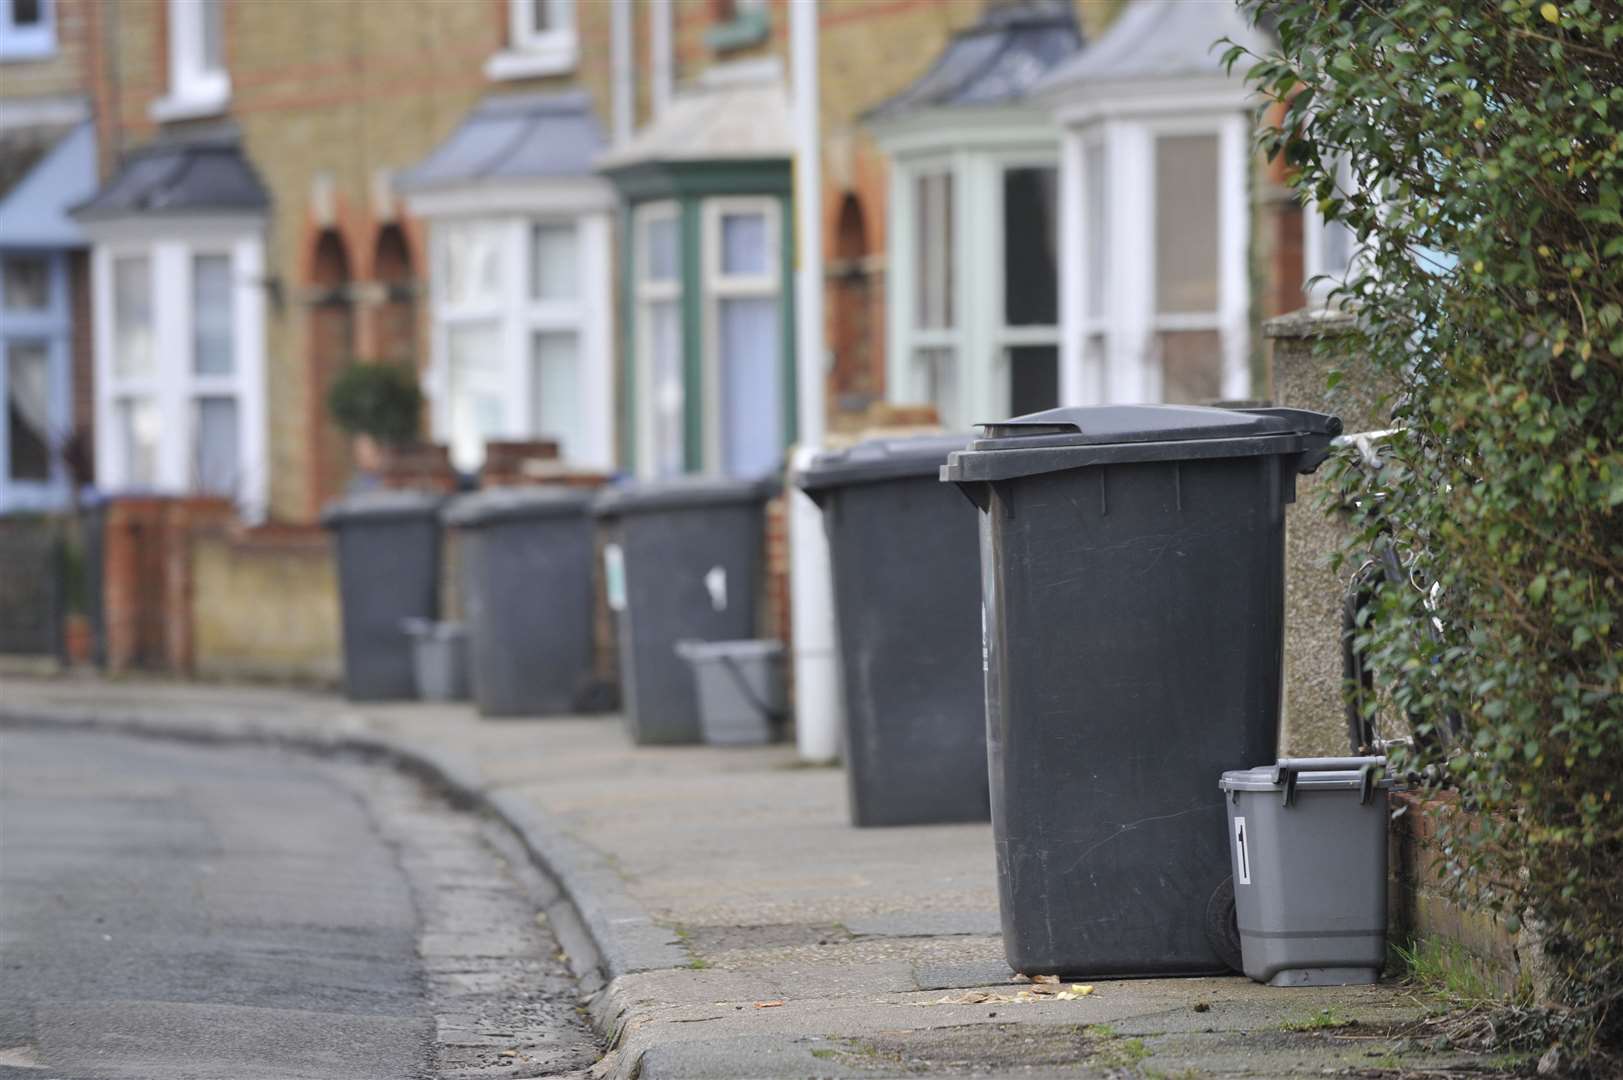 Bin workers could go on strike for three months in the Canterbury district. Picture: Tony Flashman